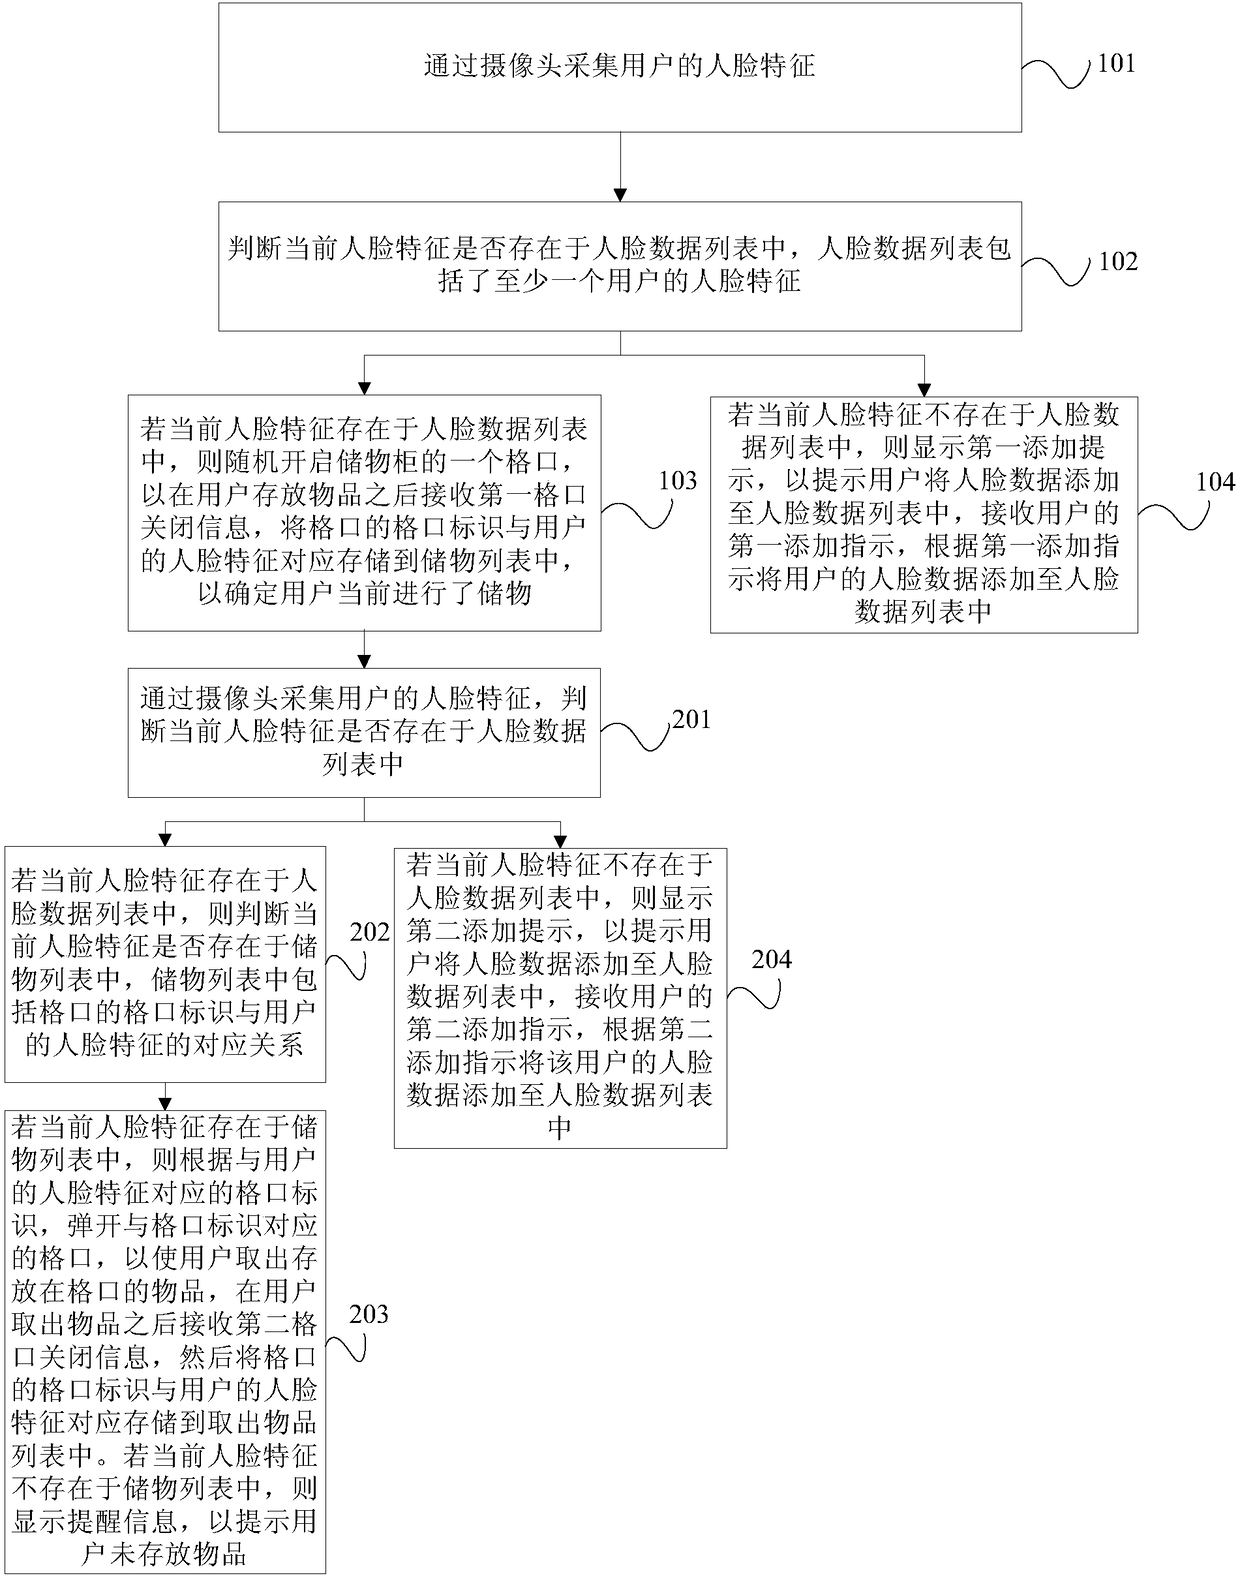 Method and device for storing and taking articles on basis of face recognition